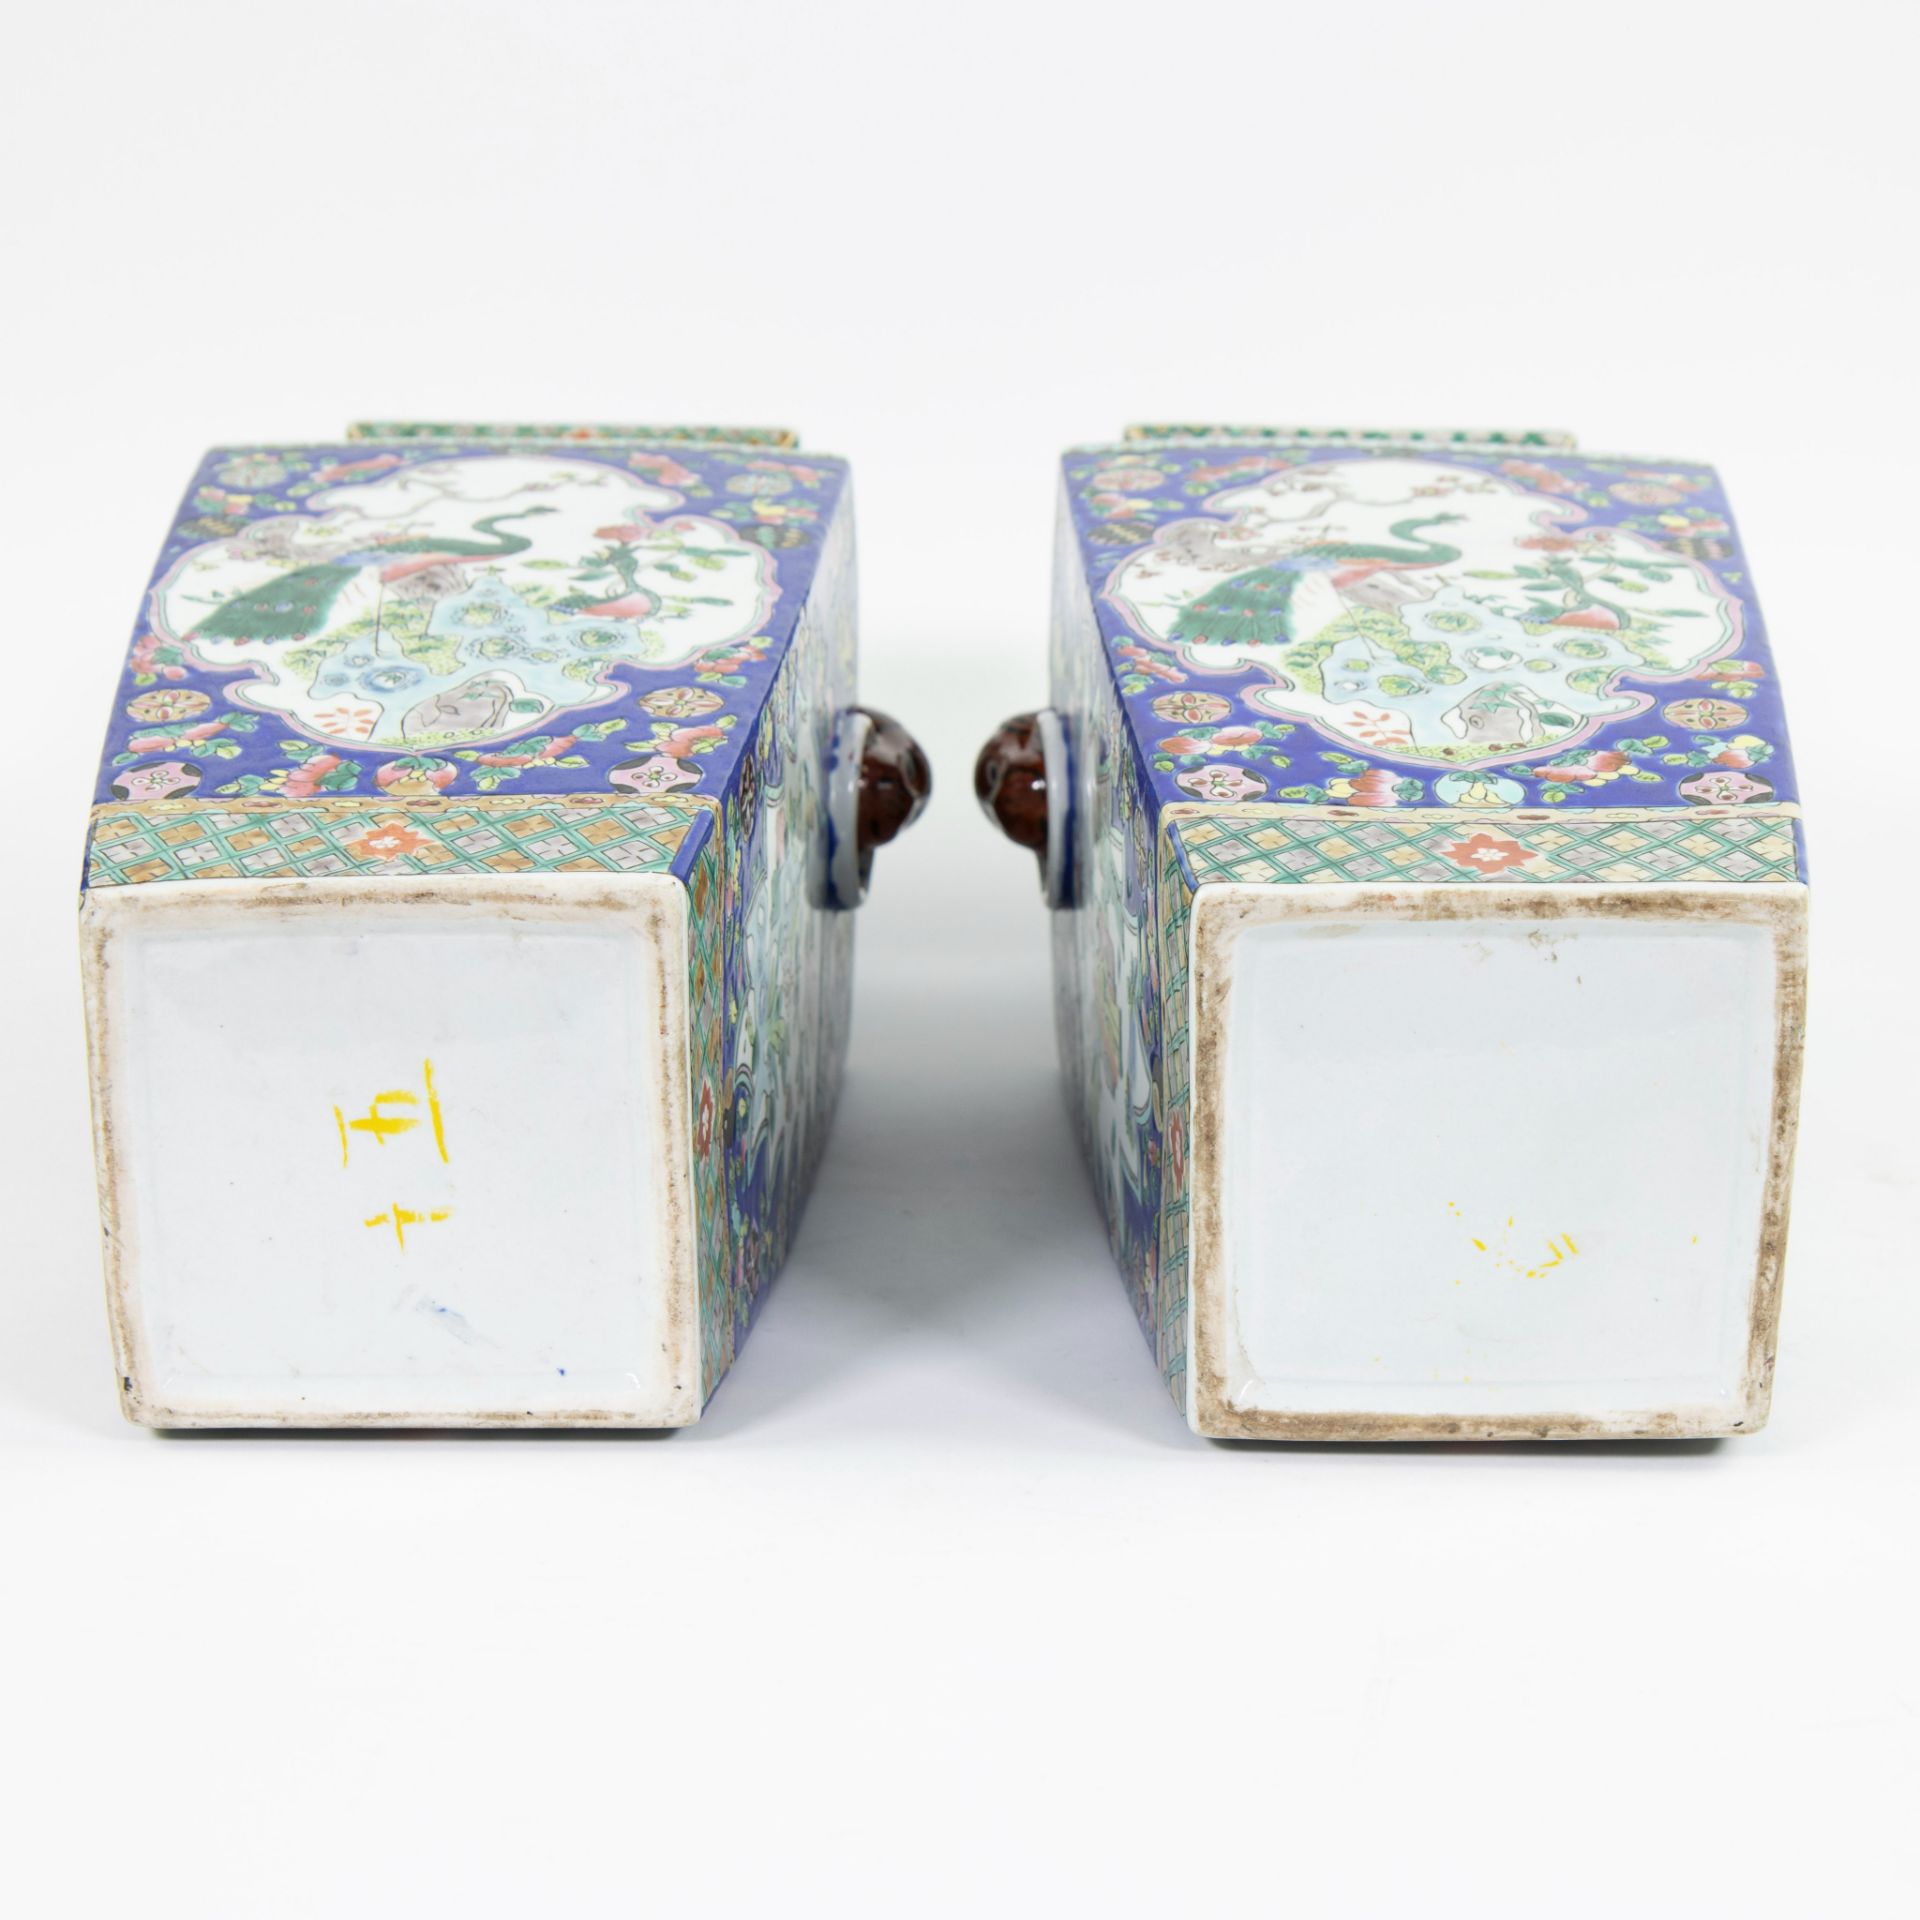 A collection of Chinese porcelain, 2 19th century lidded jars and a pair of blue famille rose vases - Image 8 of 8